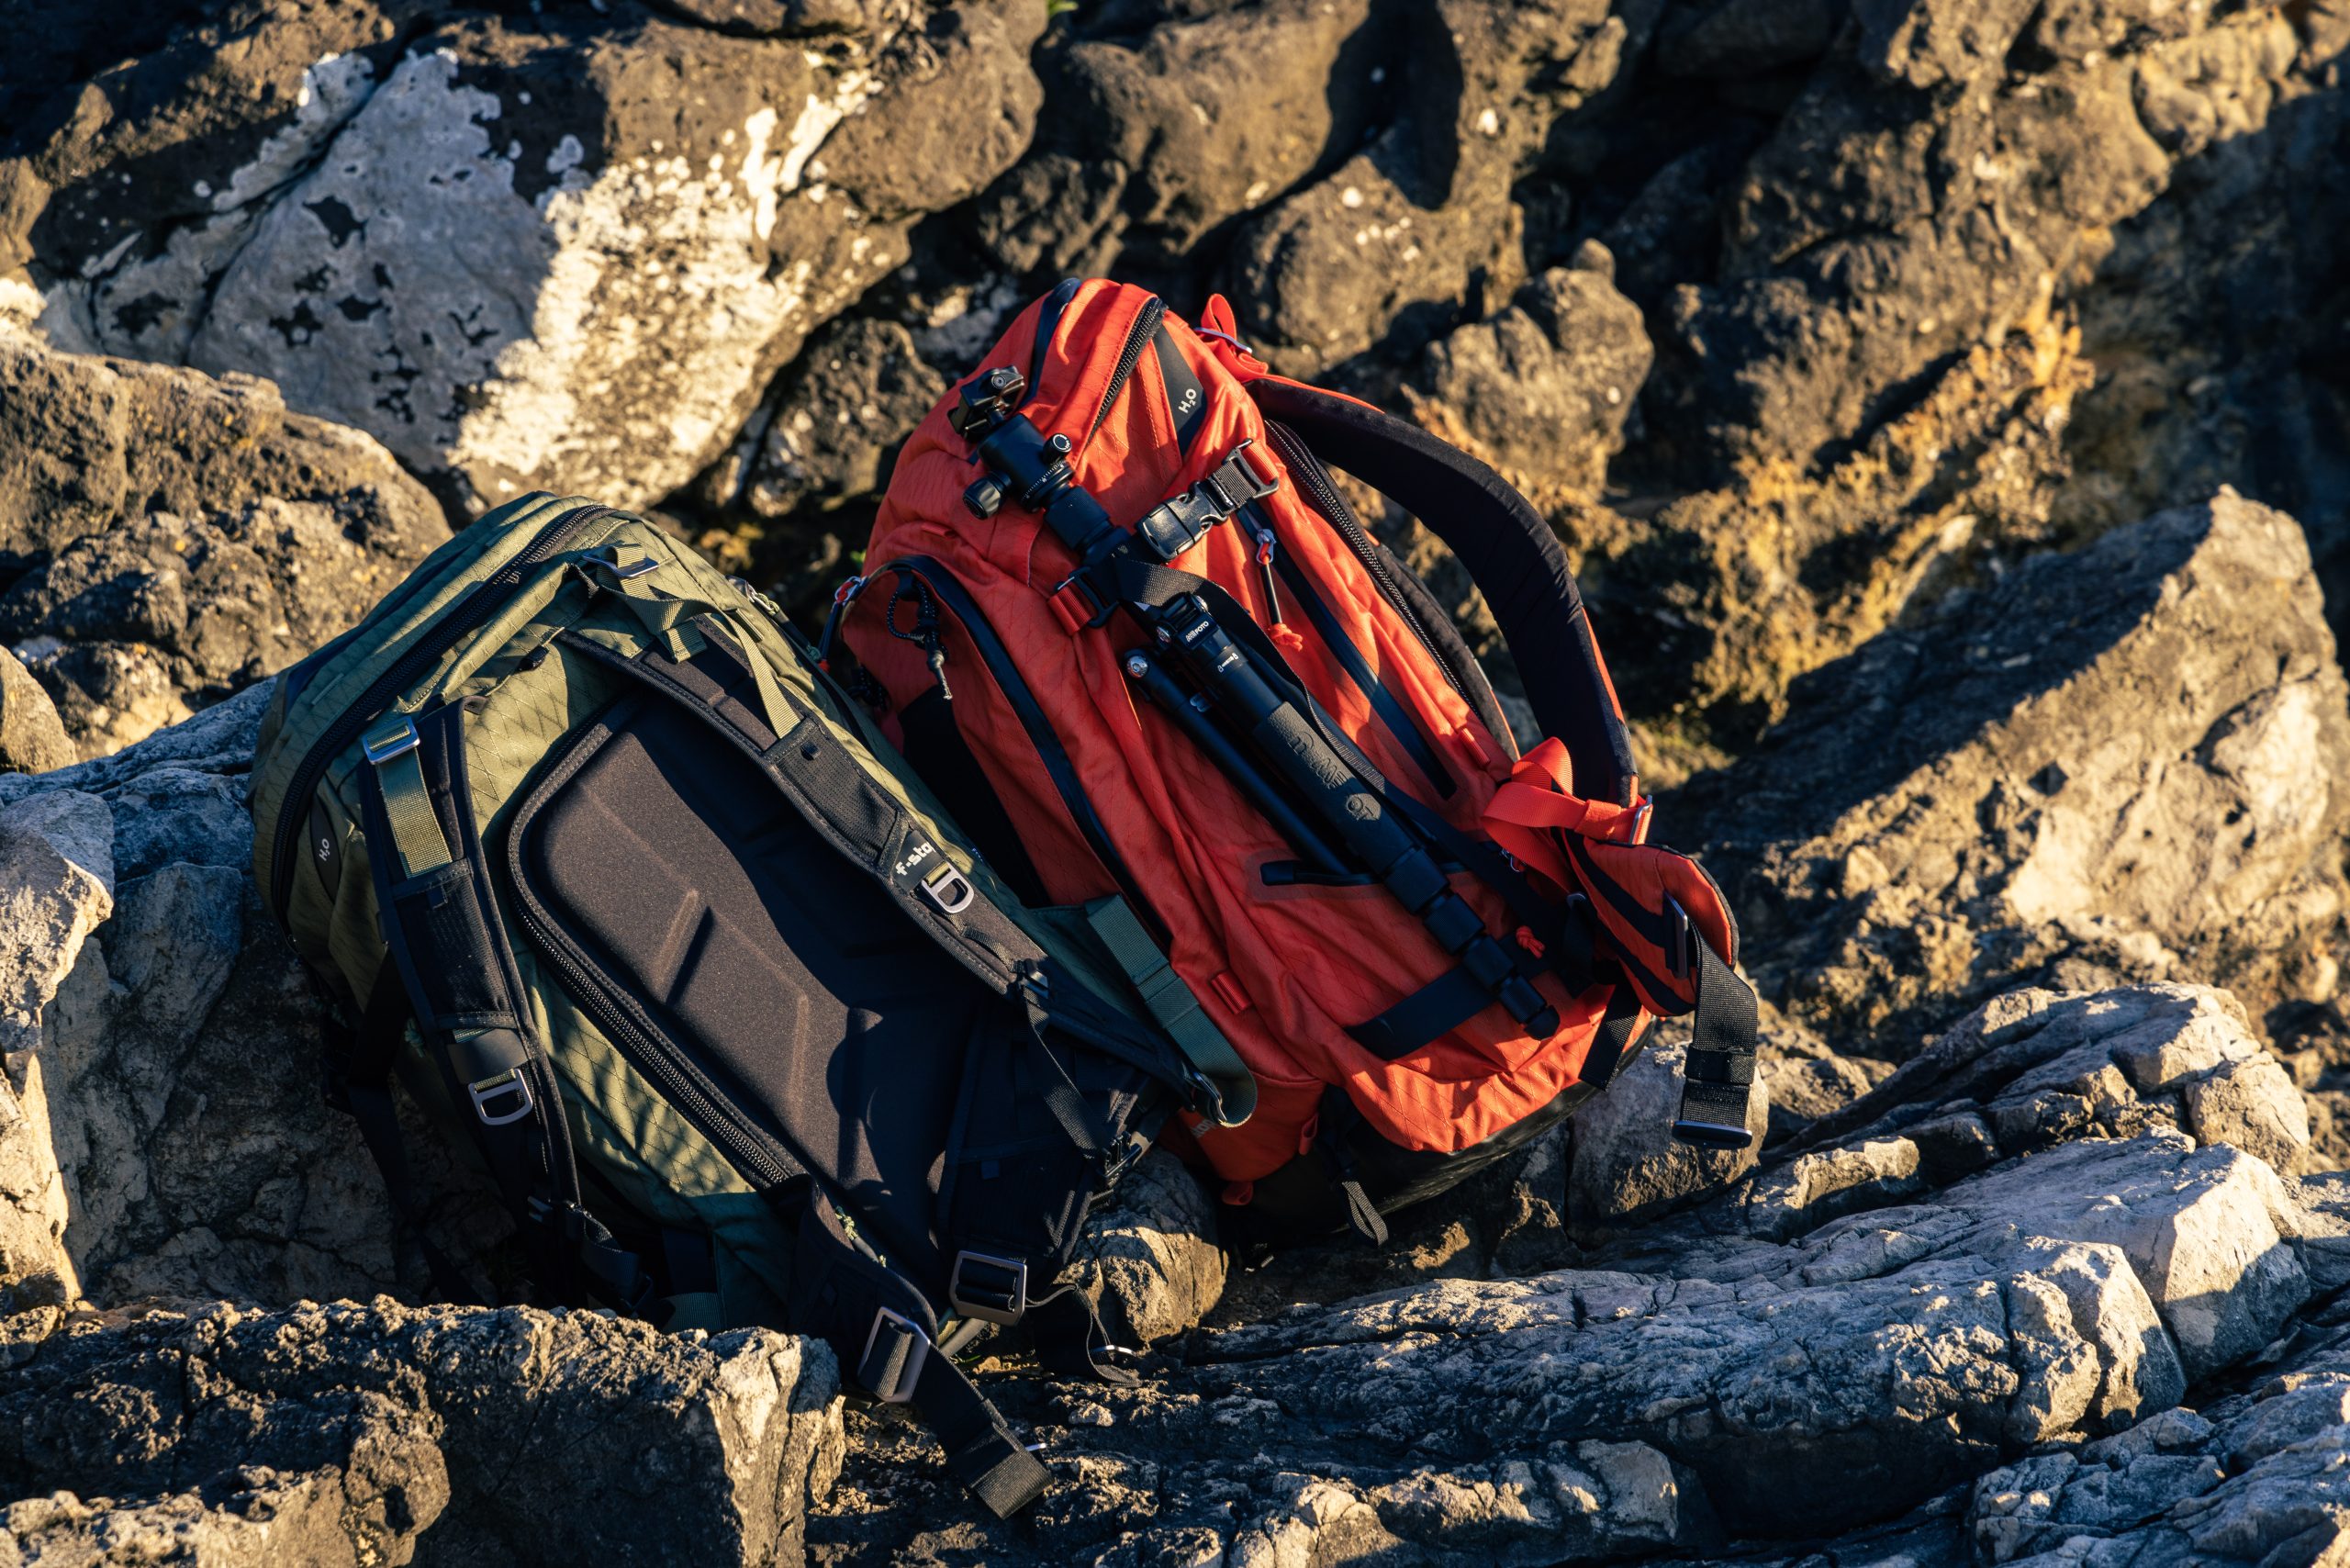 f-stop AJNA 37L camera backpack in Cypress Green color and the f-stop TILOPA 50L camera backpack in Magma Red color pictured on rocks